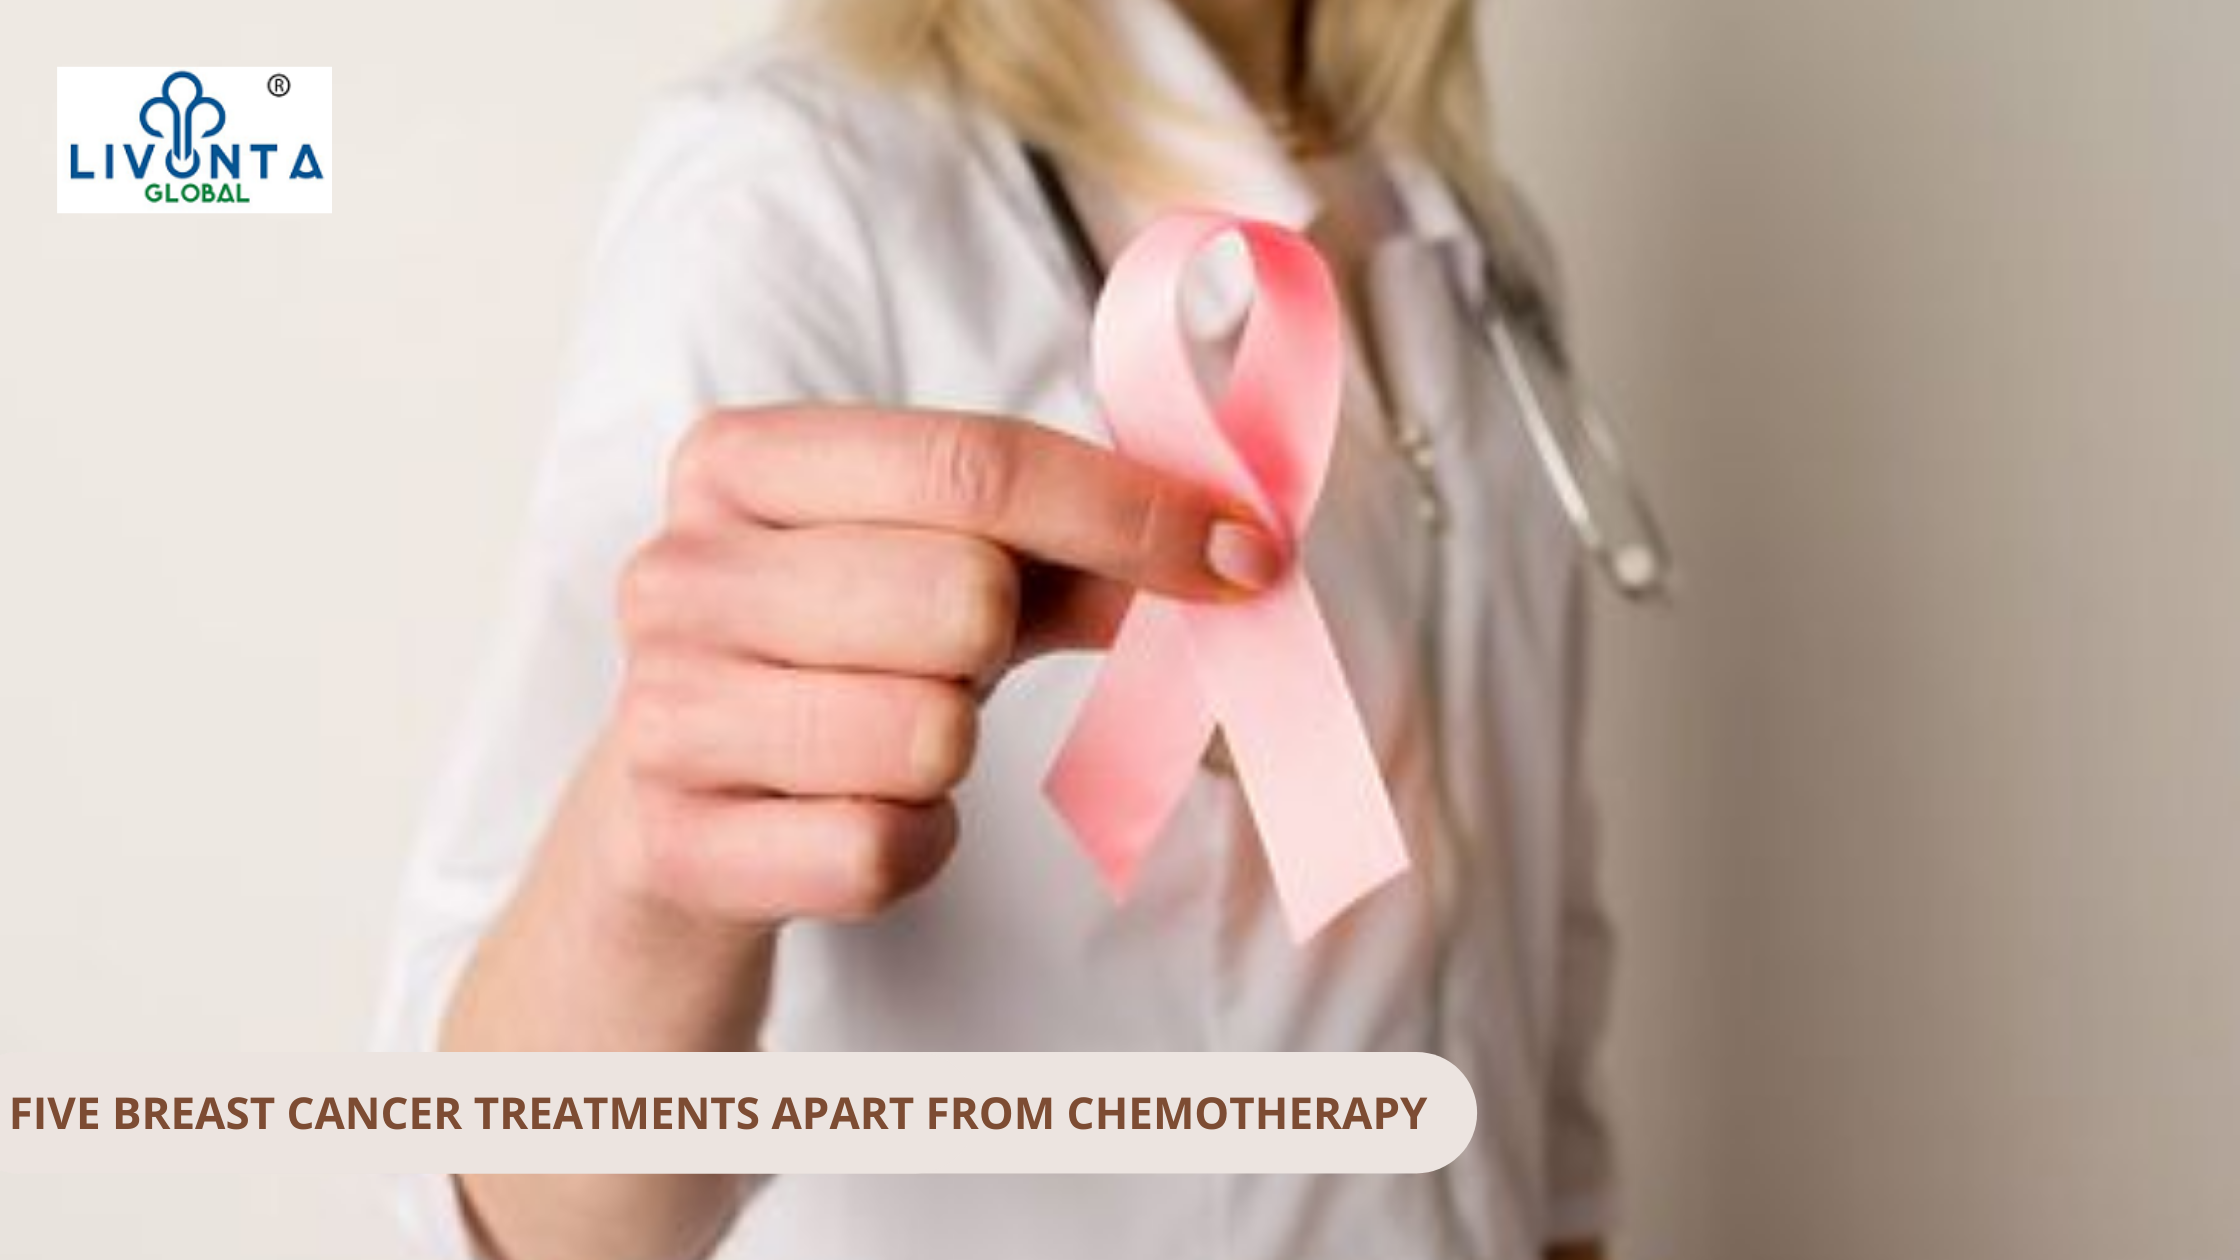 Five breast cancer treatments apart from chemotherapy